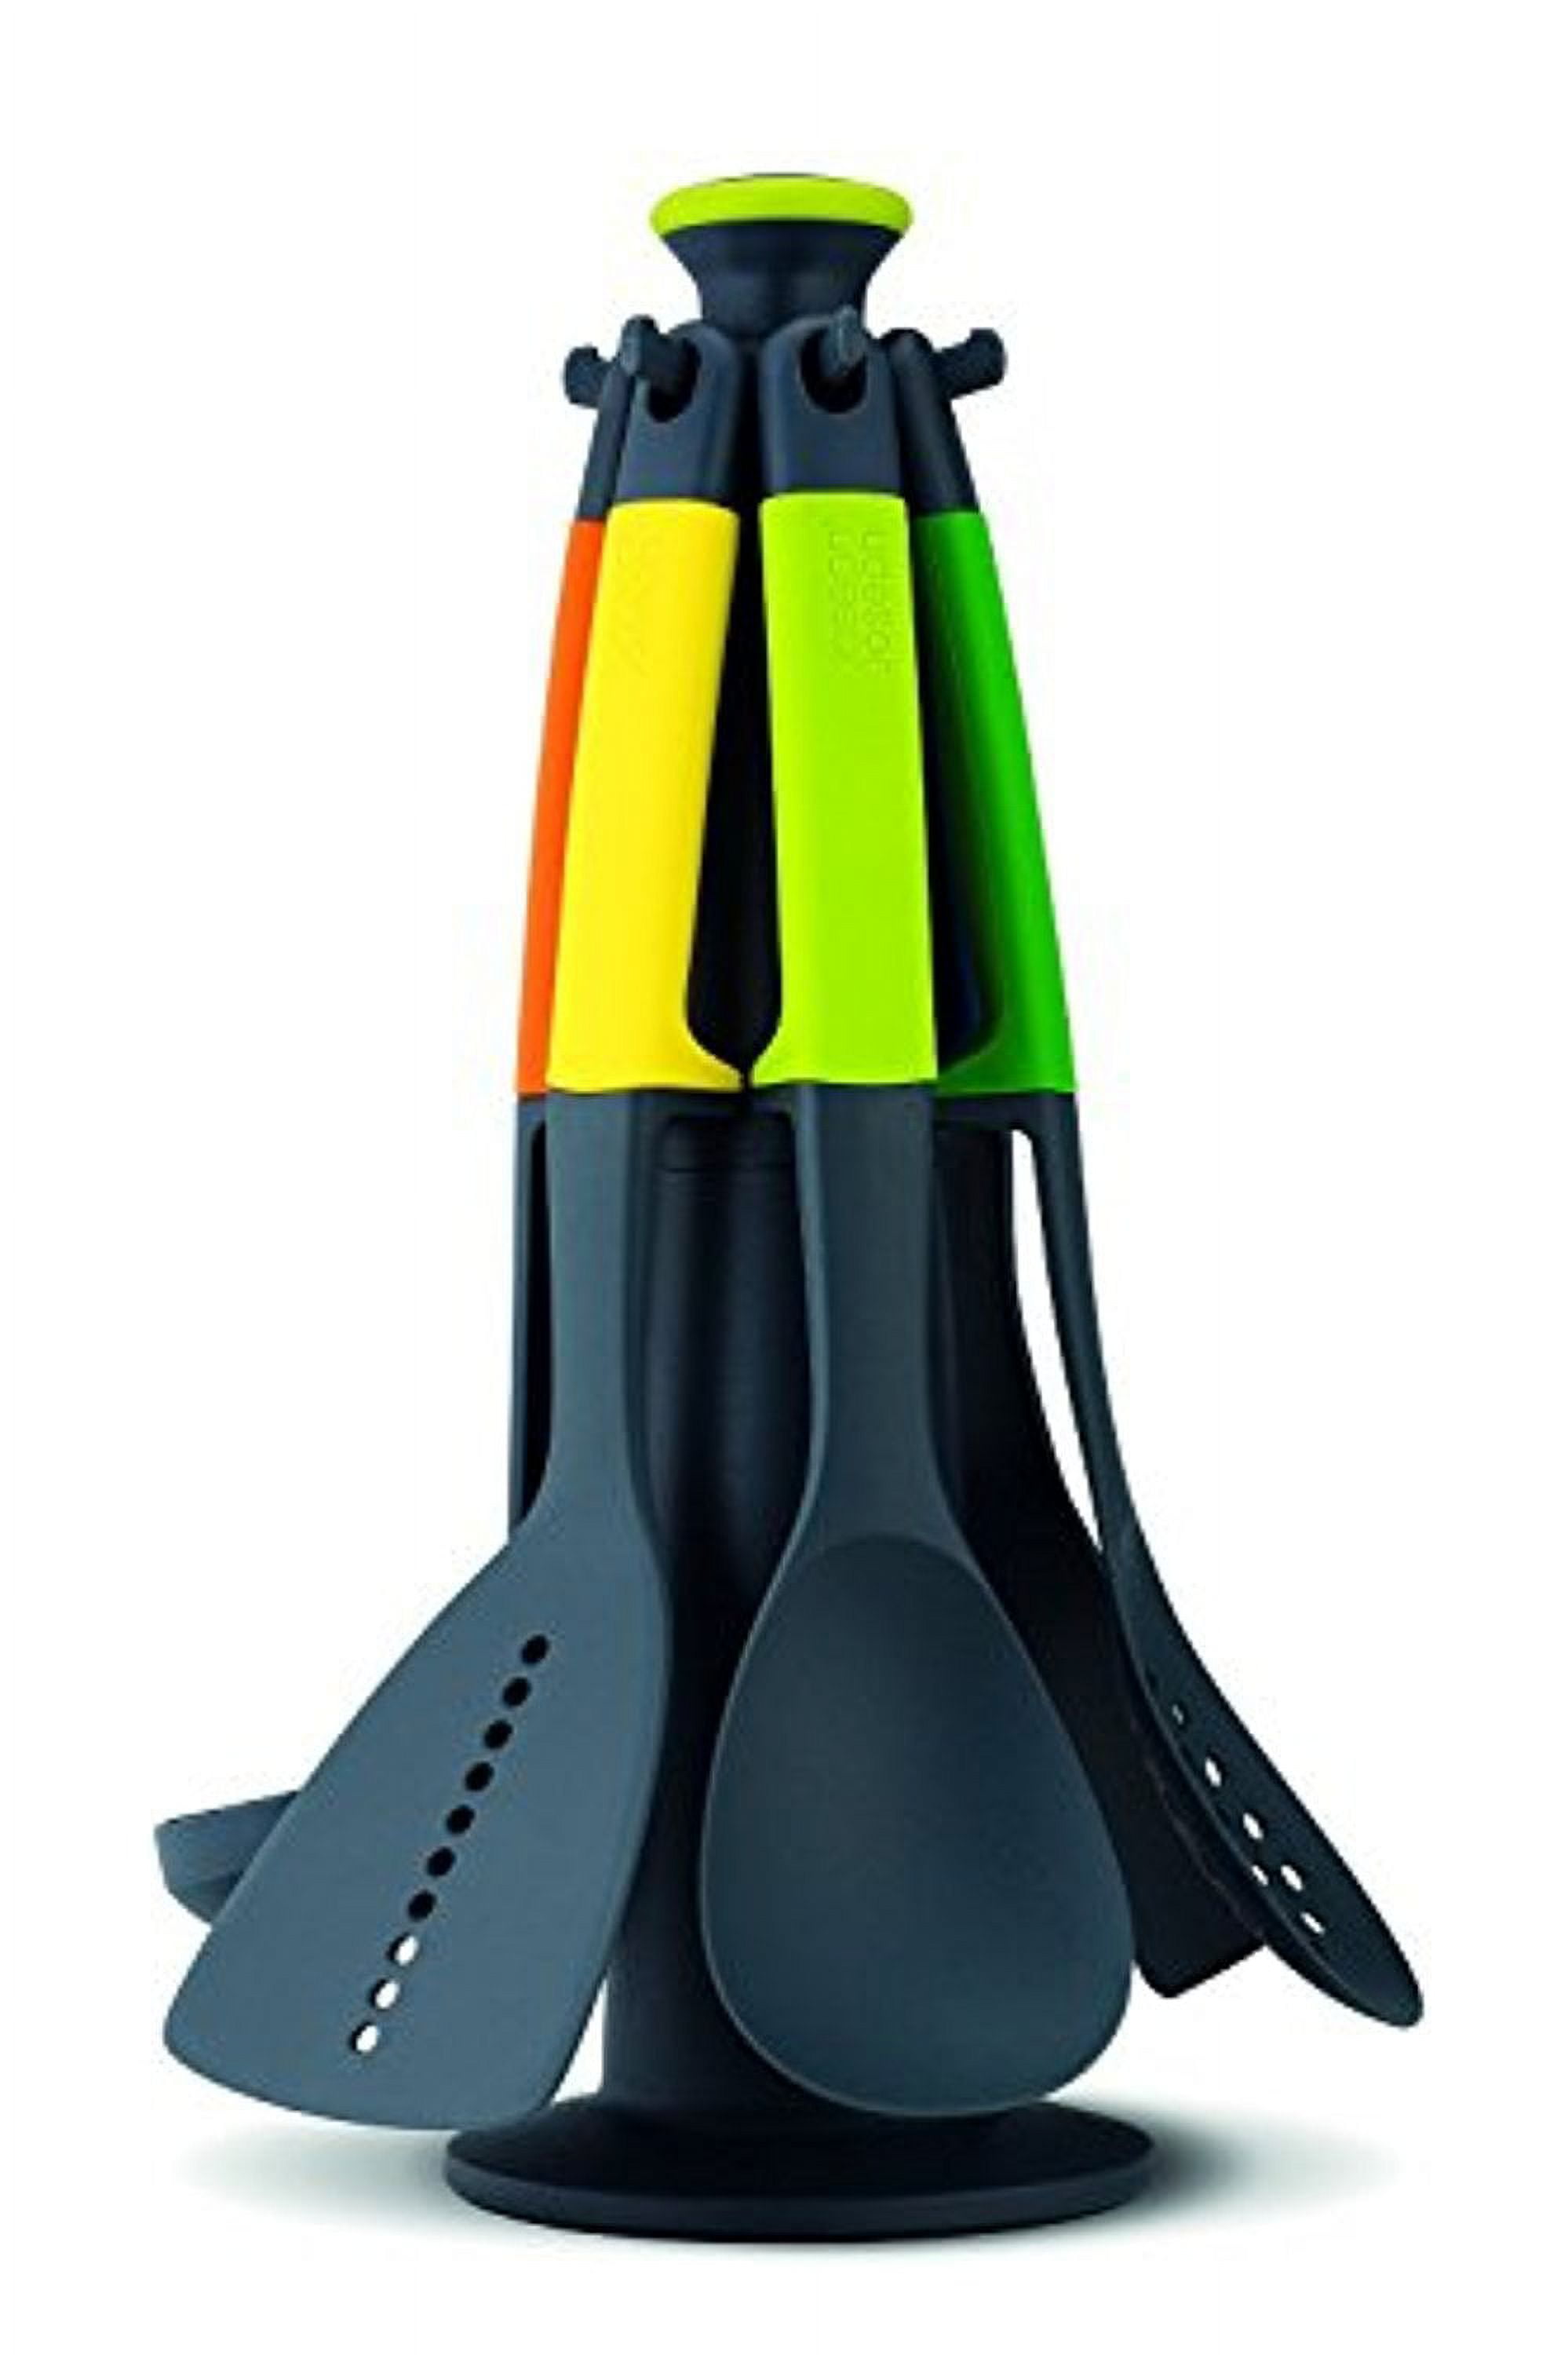 Servappetit Colorful Kitchen Utensils Tool Set, Nonstick Cookware,  Dishwasher Safe, 6 - Piece With Rotating Stand